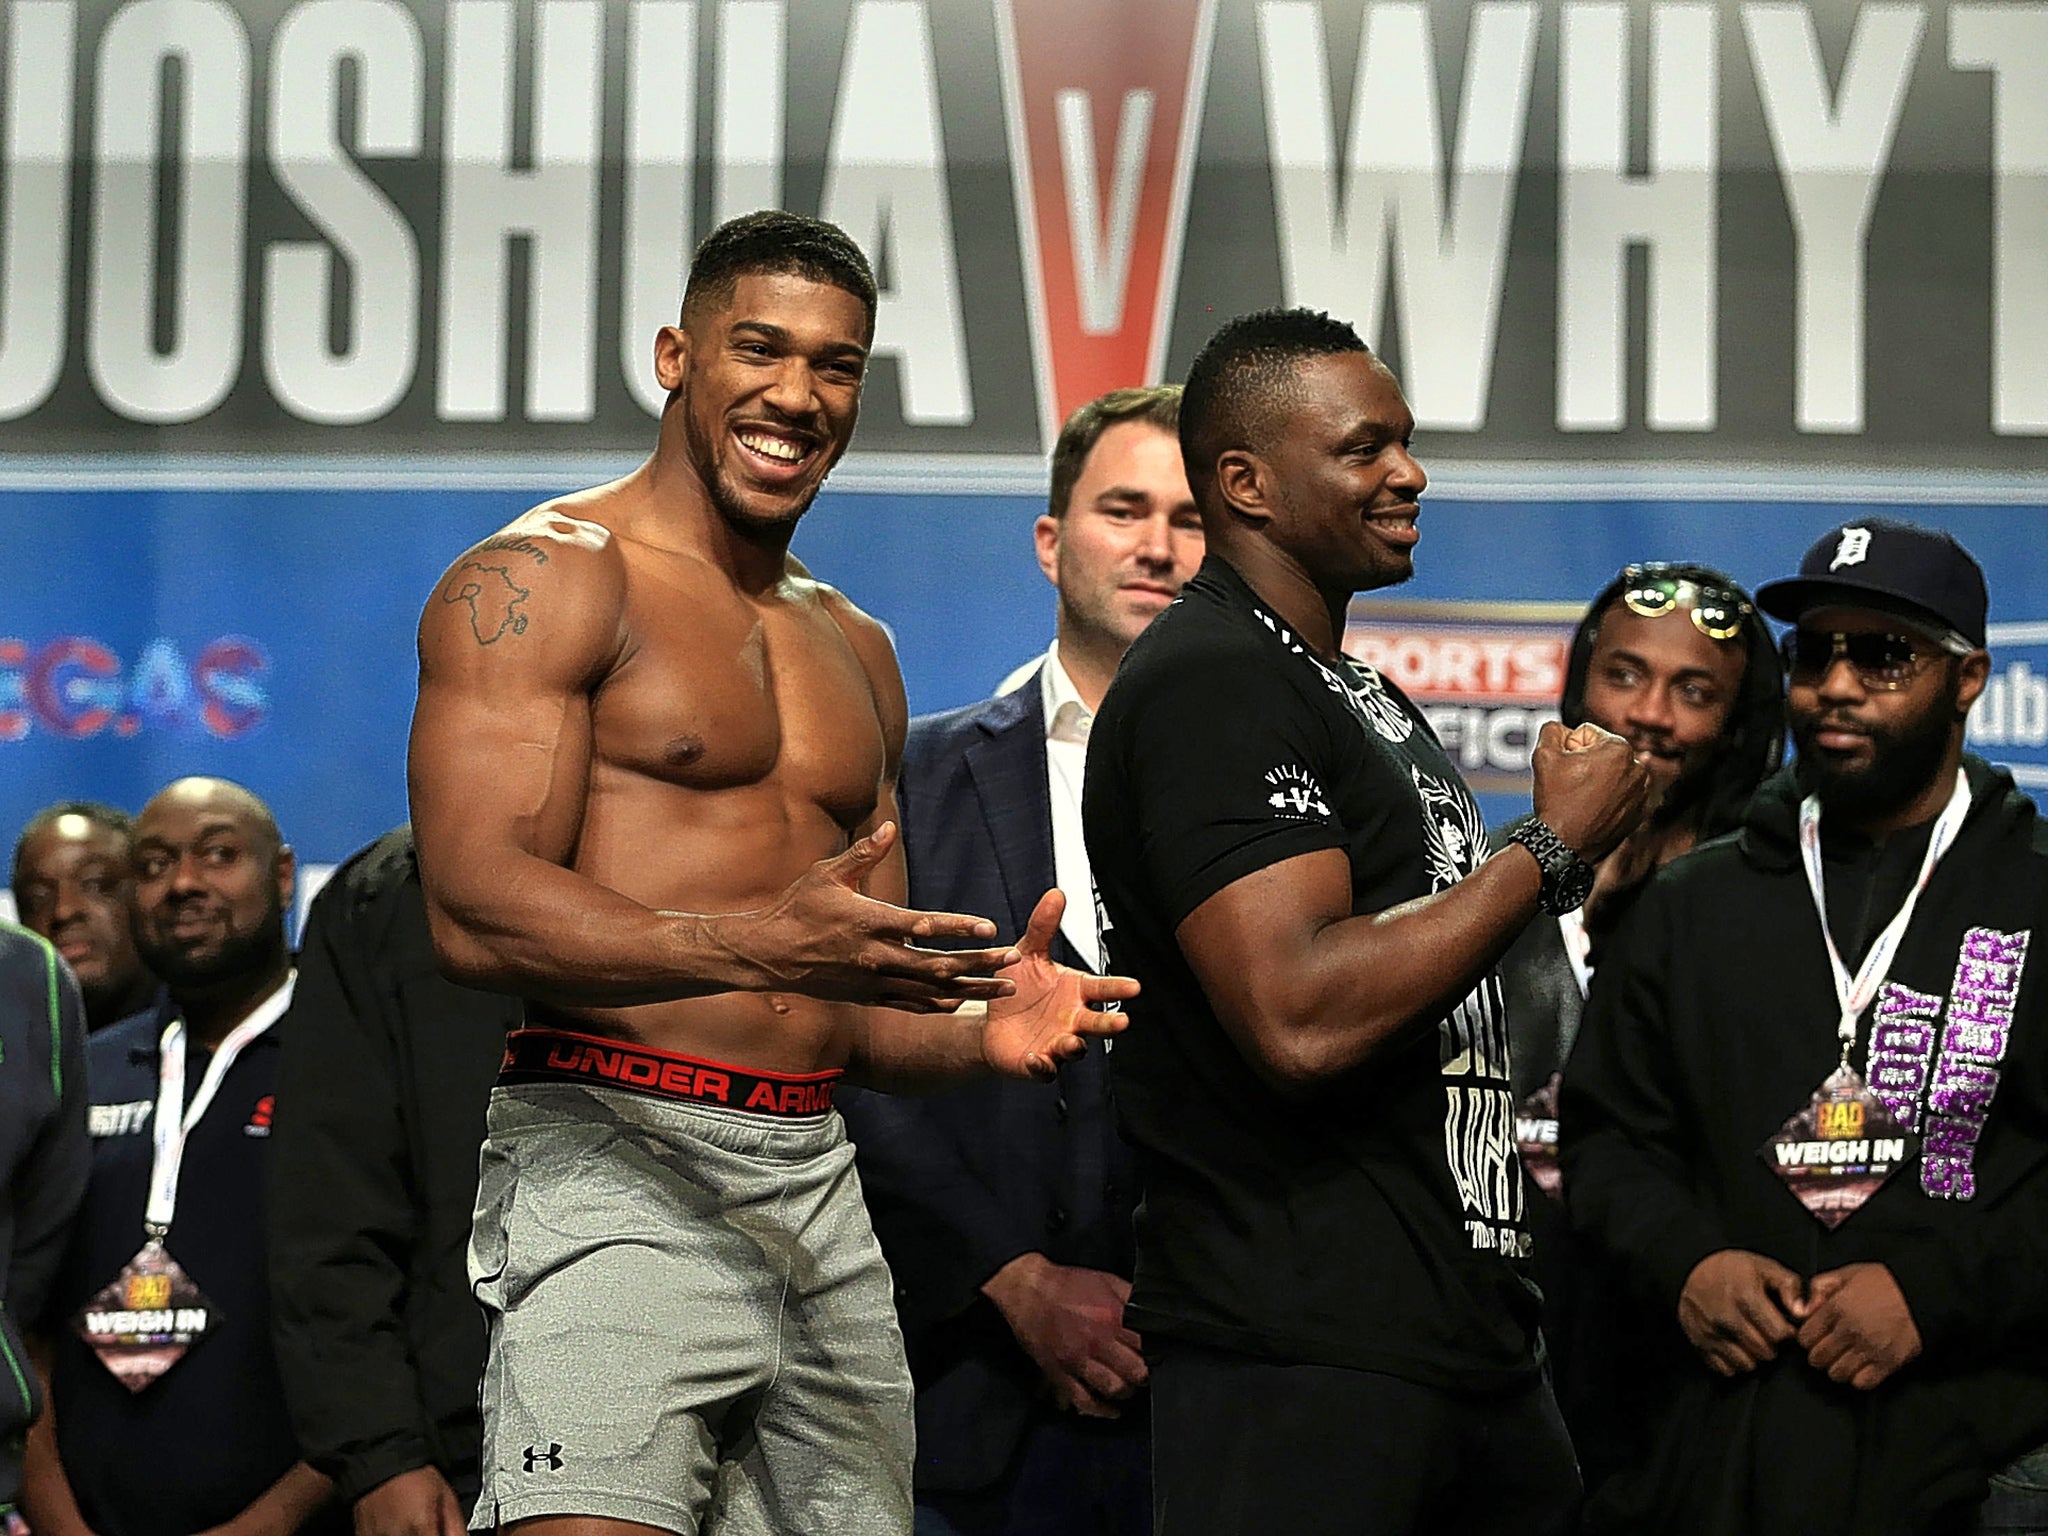 Anthony Joshua (left) and Dillian Whyte during Friday's weigh-in at The O2 in London